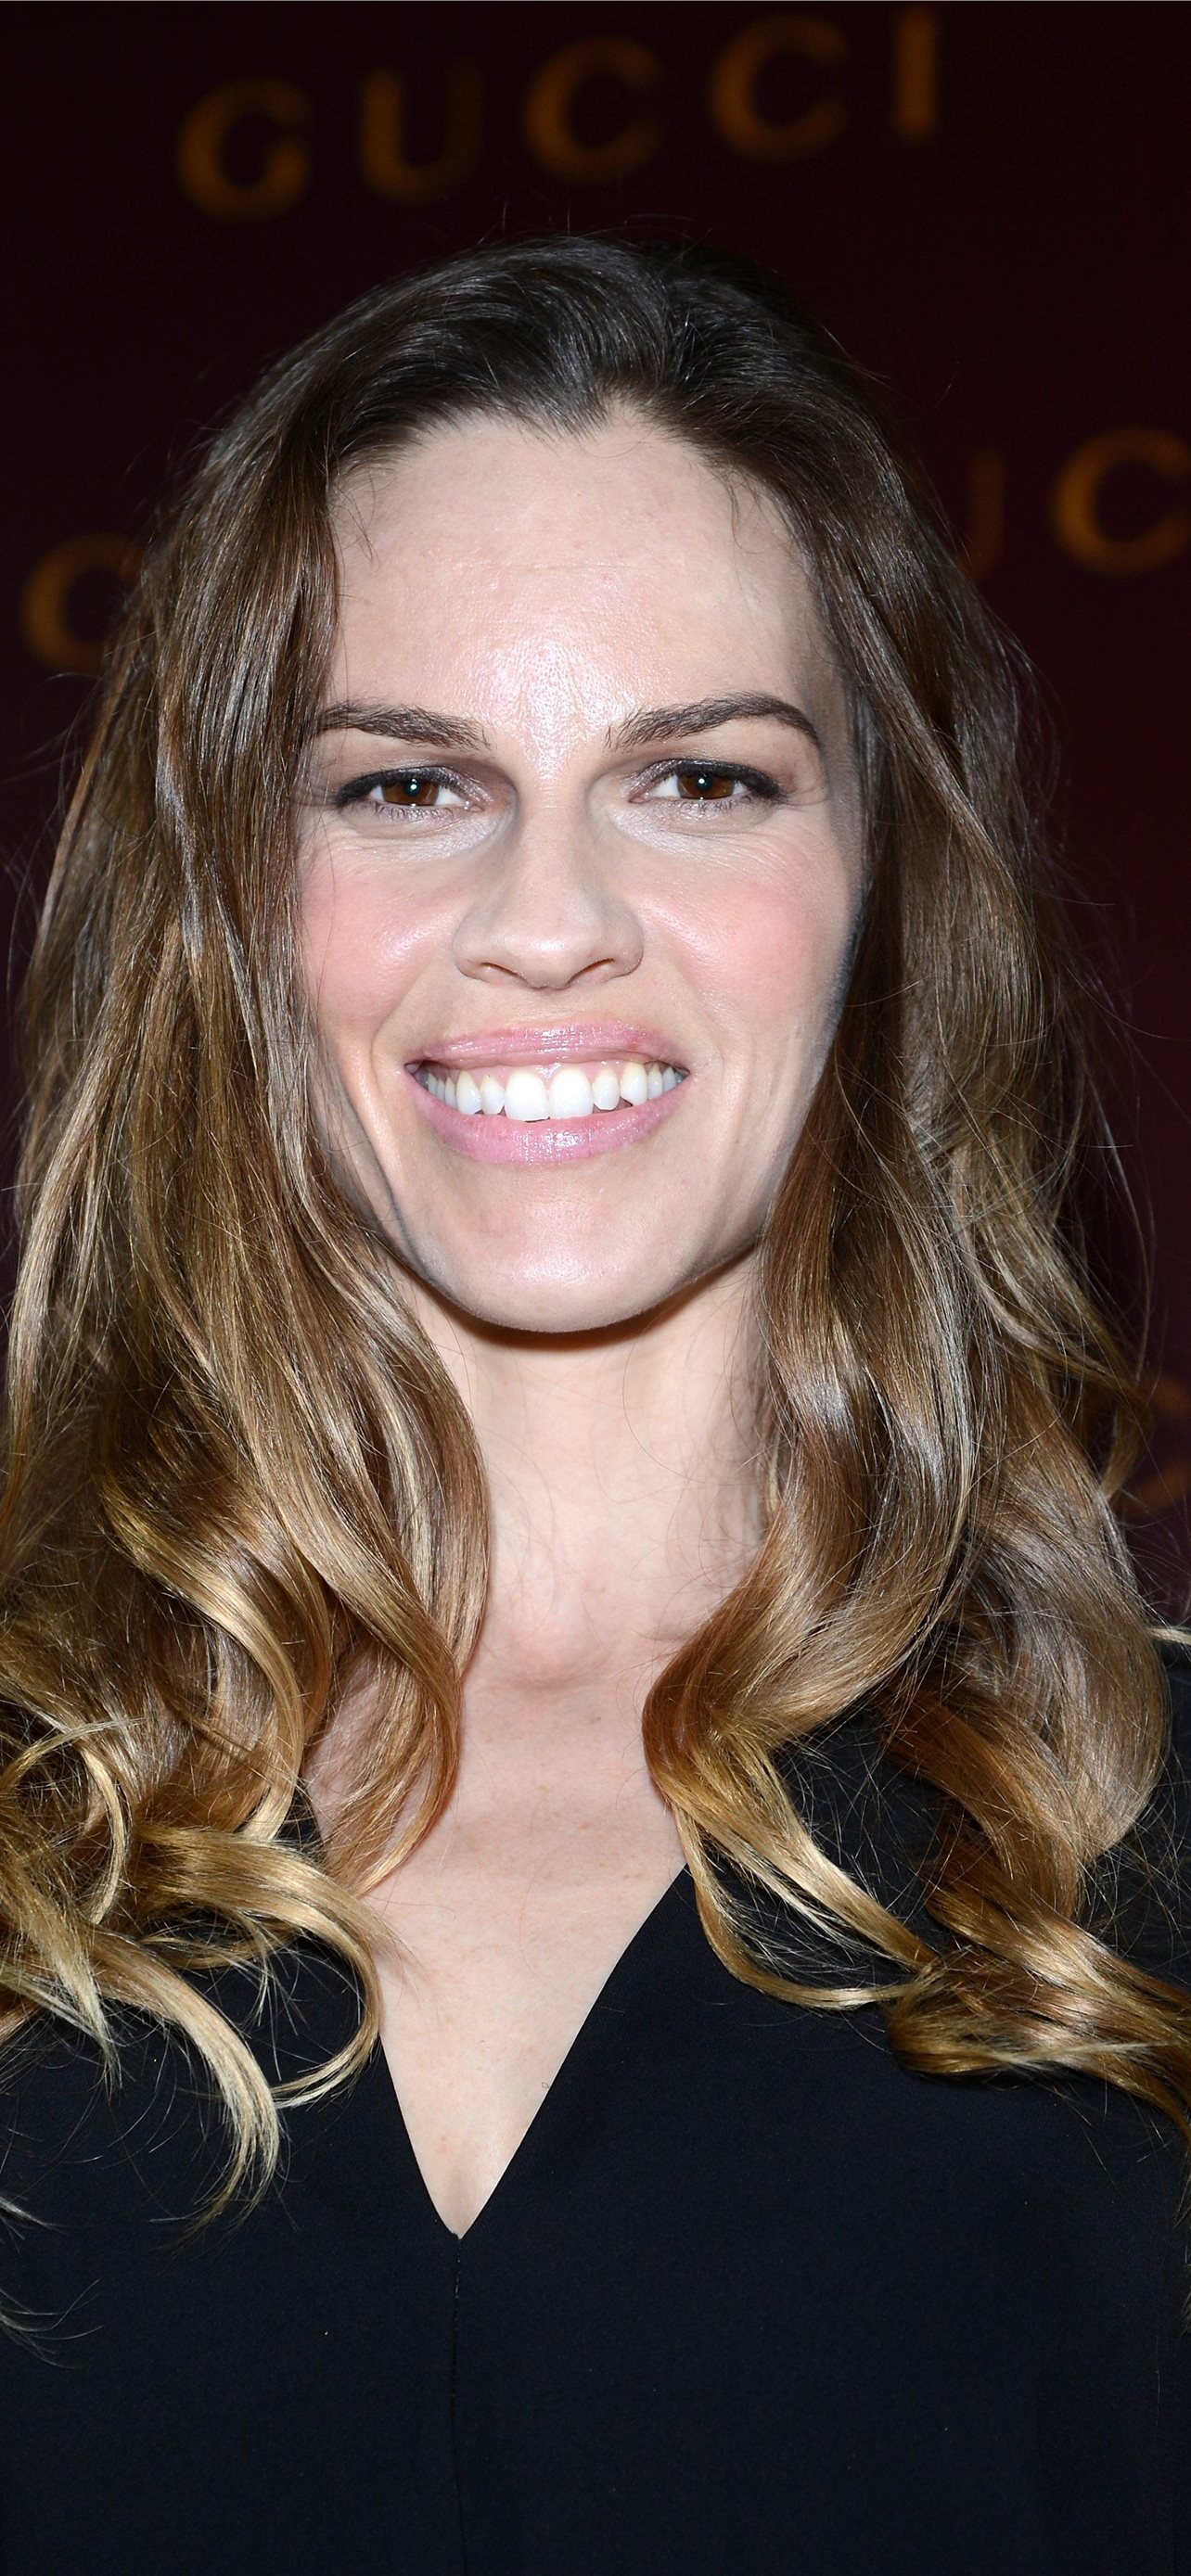 Hilary Swank: American actress who won two best actress Academy Awards. 1290x2780 HD Background.